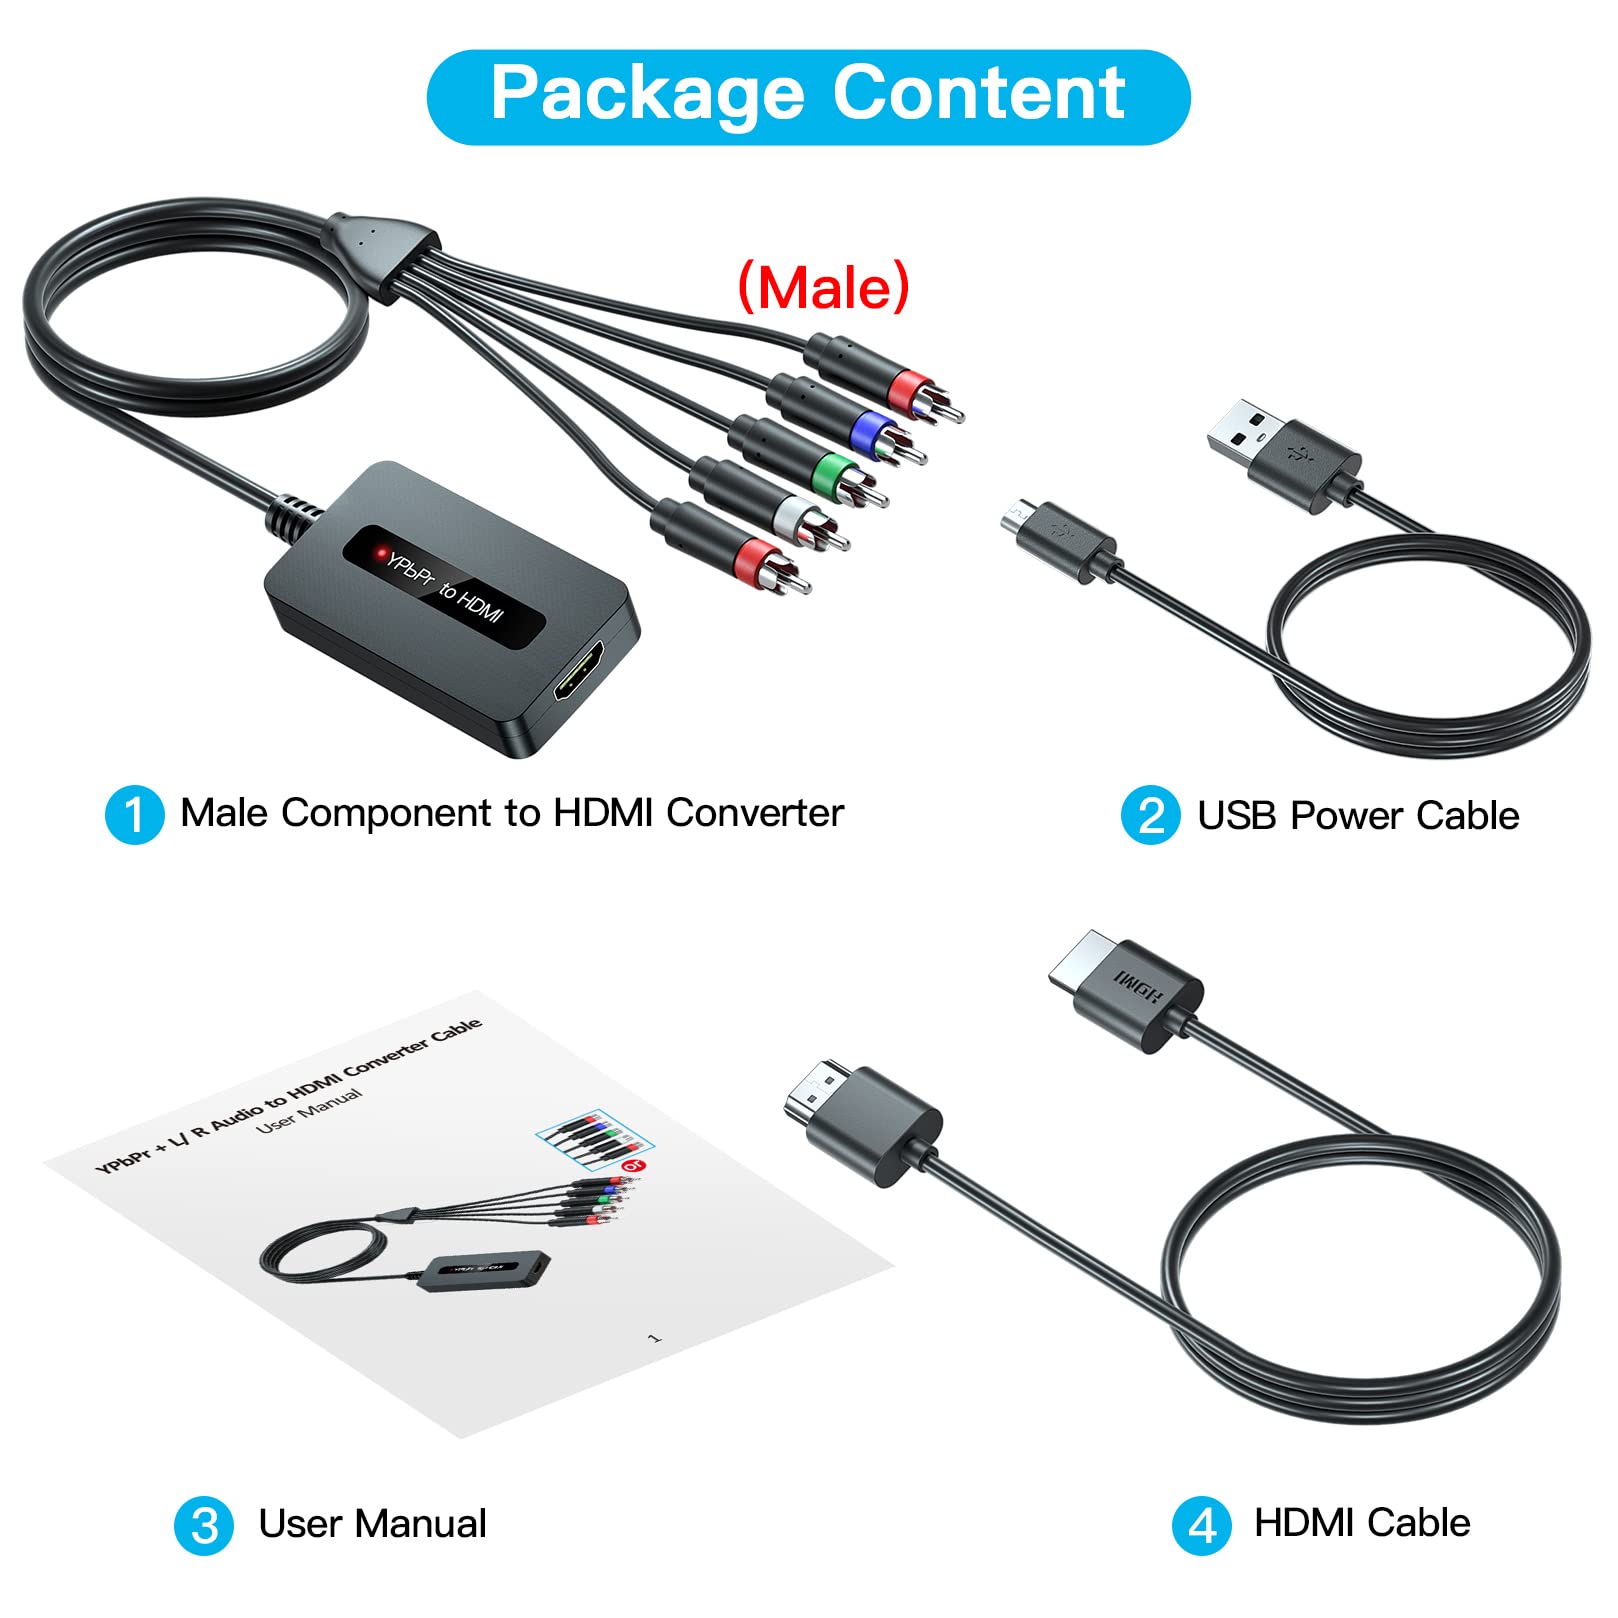 Male Component to HDMI Converter Cable with HDMI and Component Cables for DVD/ STB with Female Component Output to Display on HDTVs, 1080P RGB YPbPr to HDMI Converter, Component in HDMI Out Adapter…